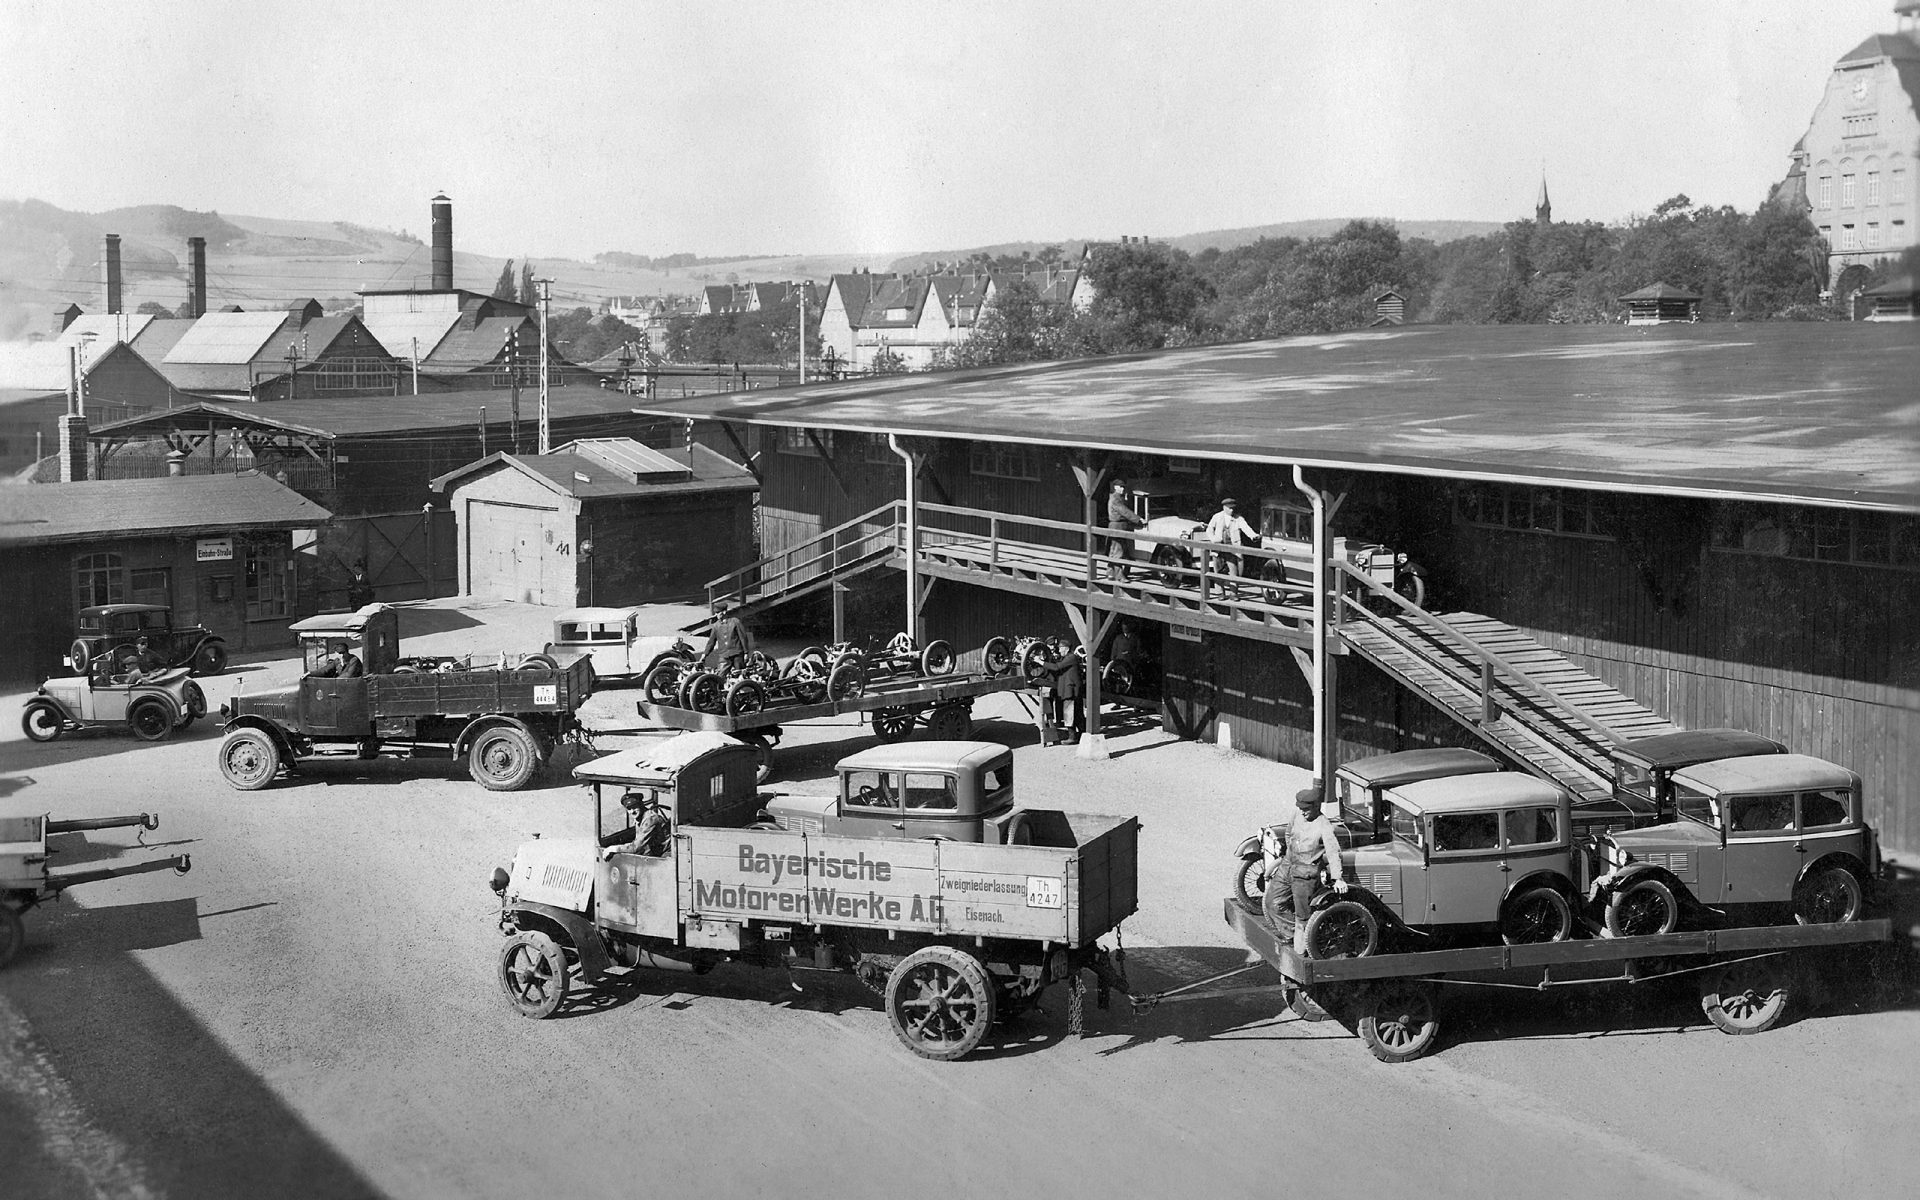 Delivery of BMW vehicles in 1928.